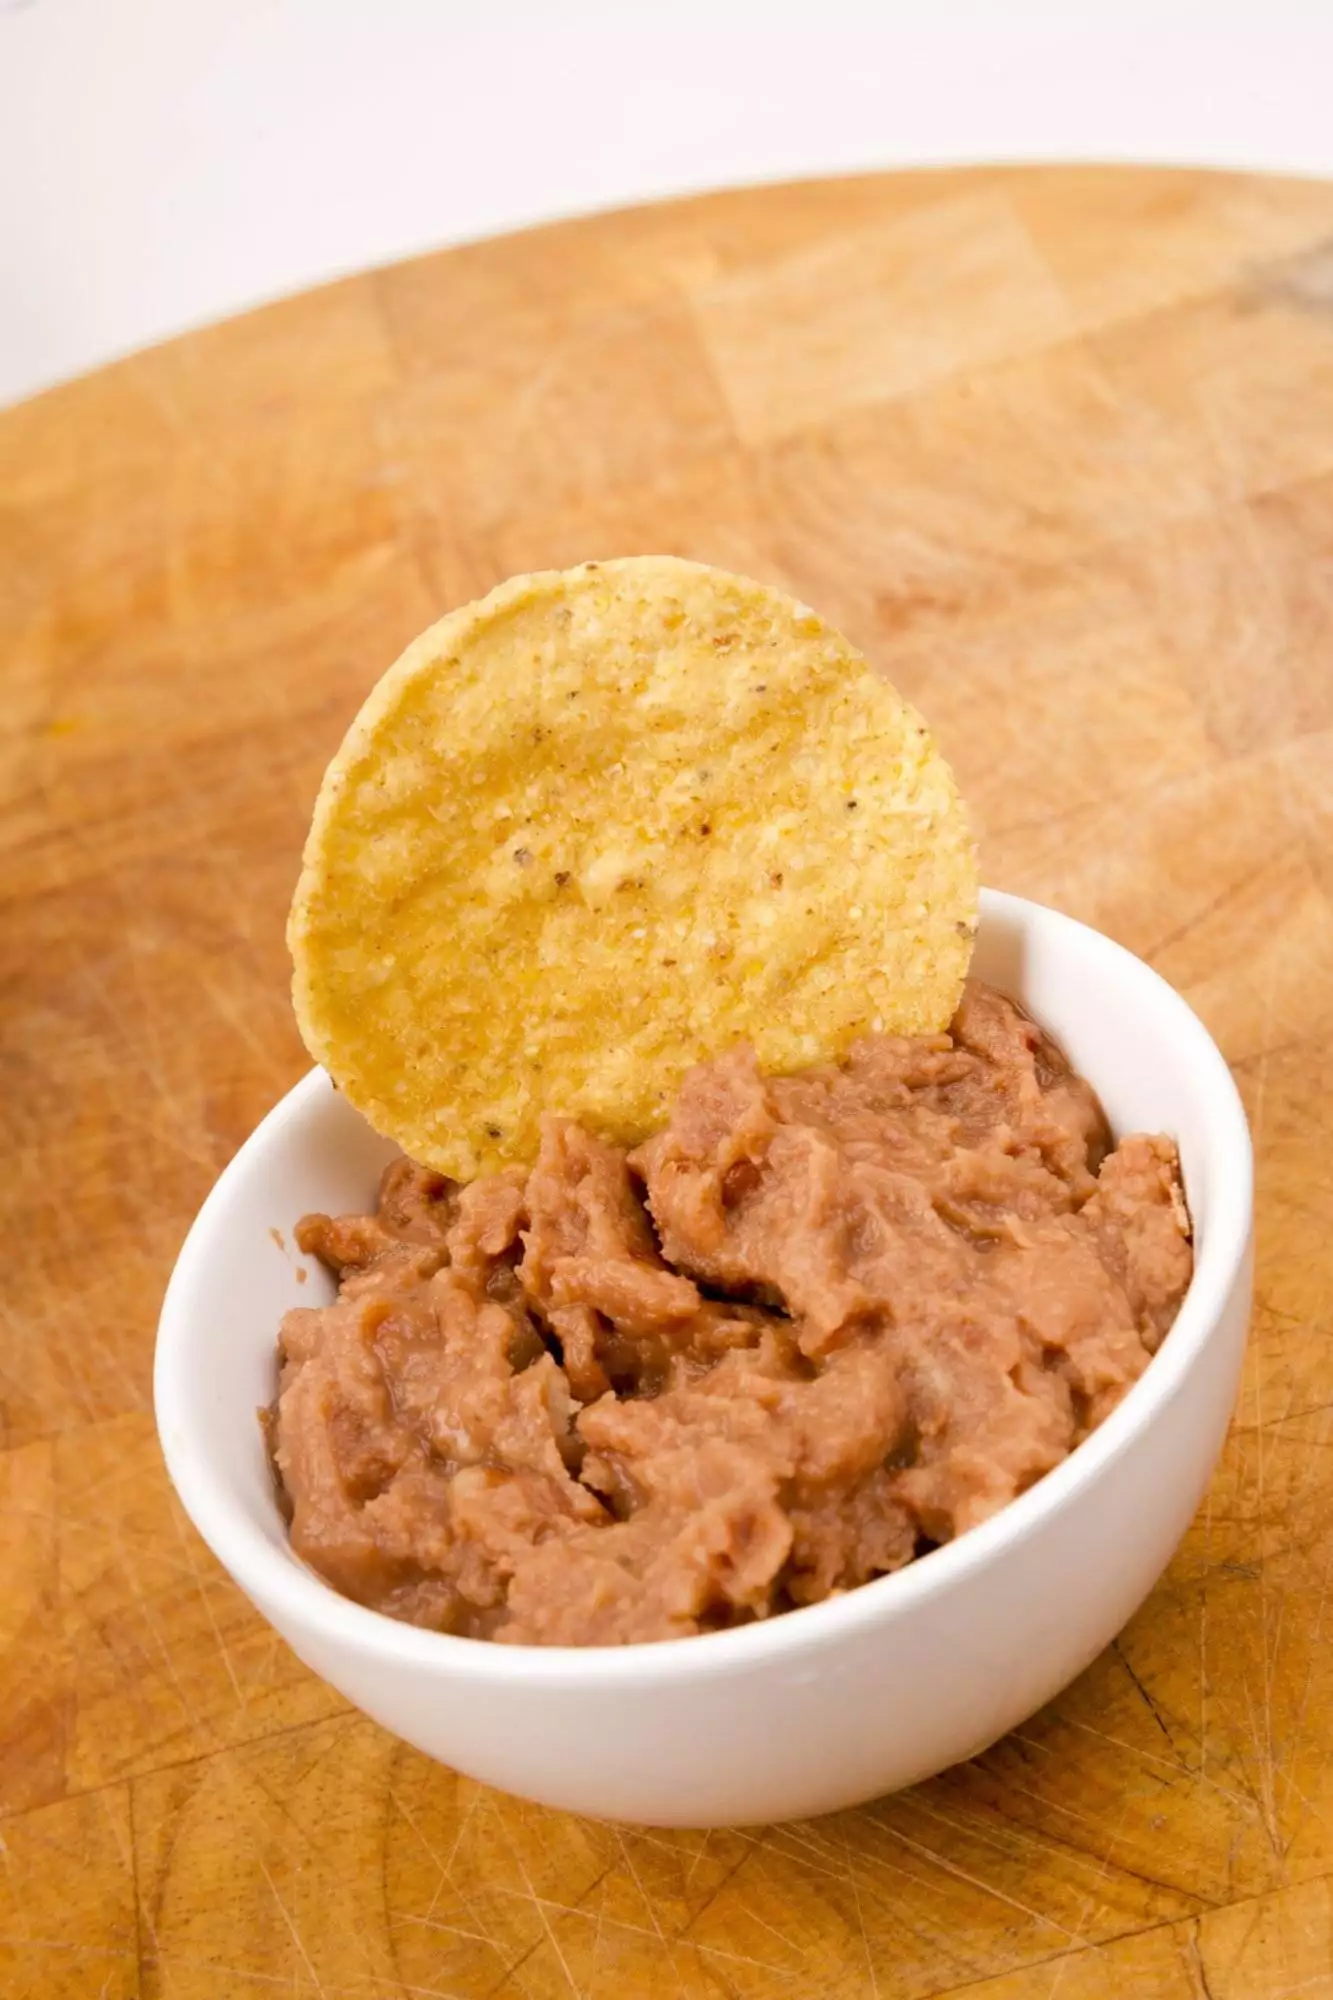 Are refried beans healthy?